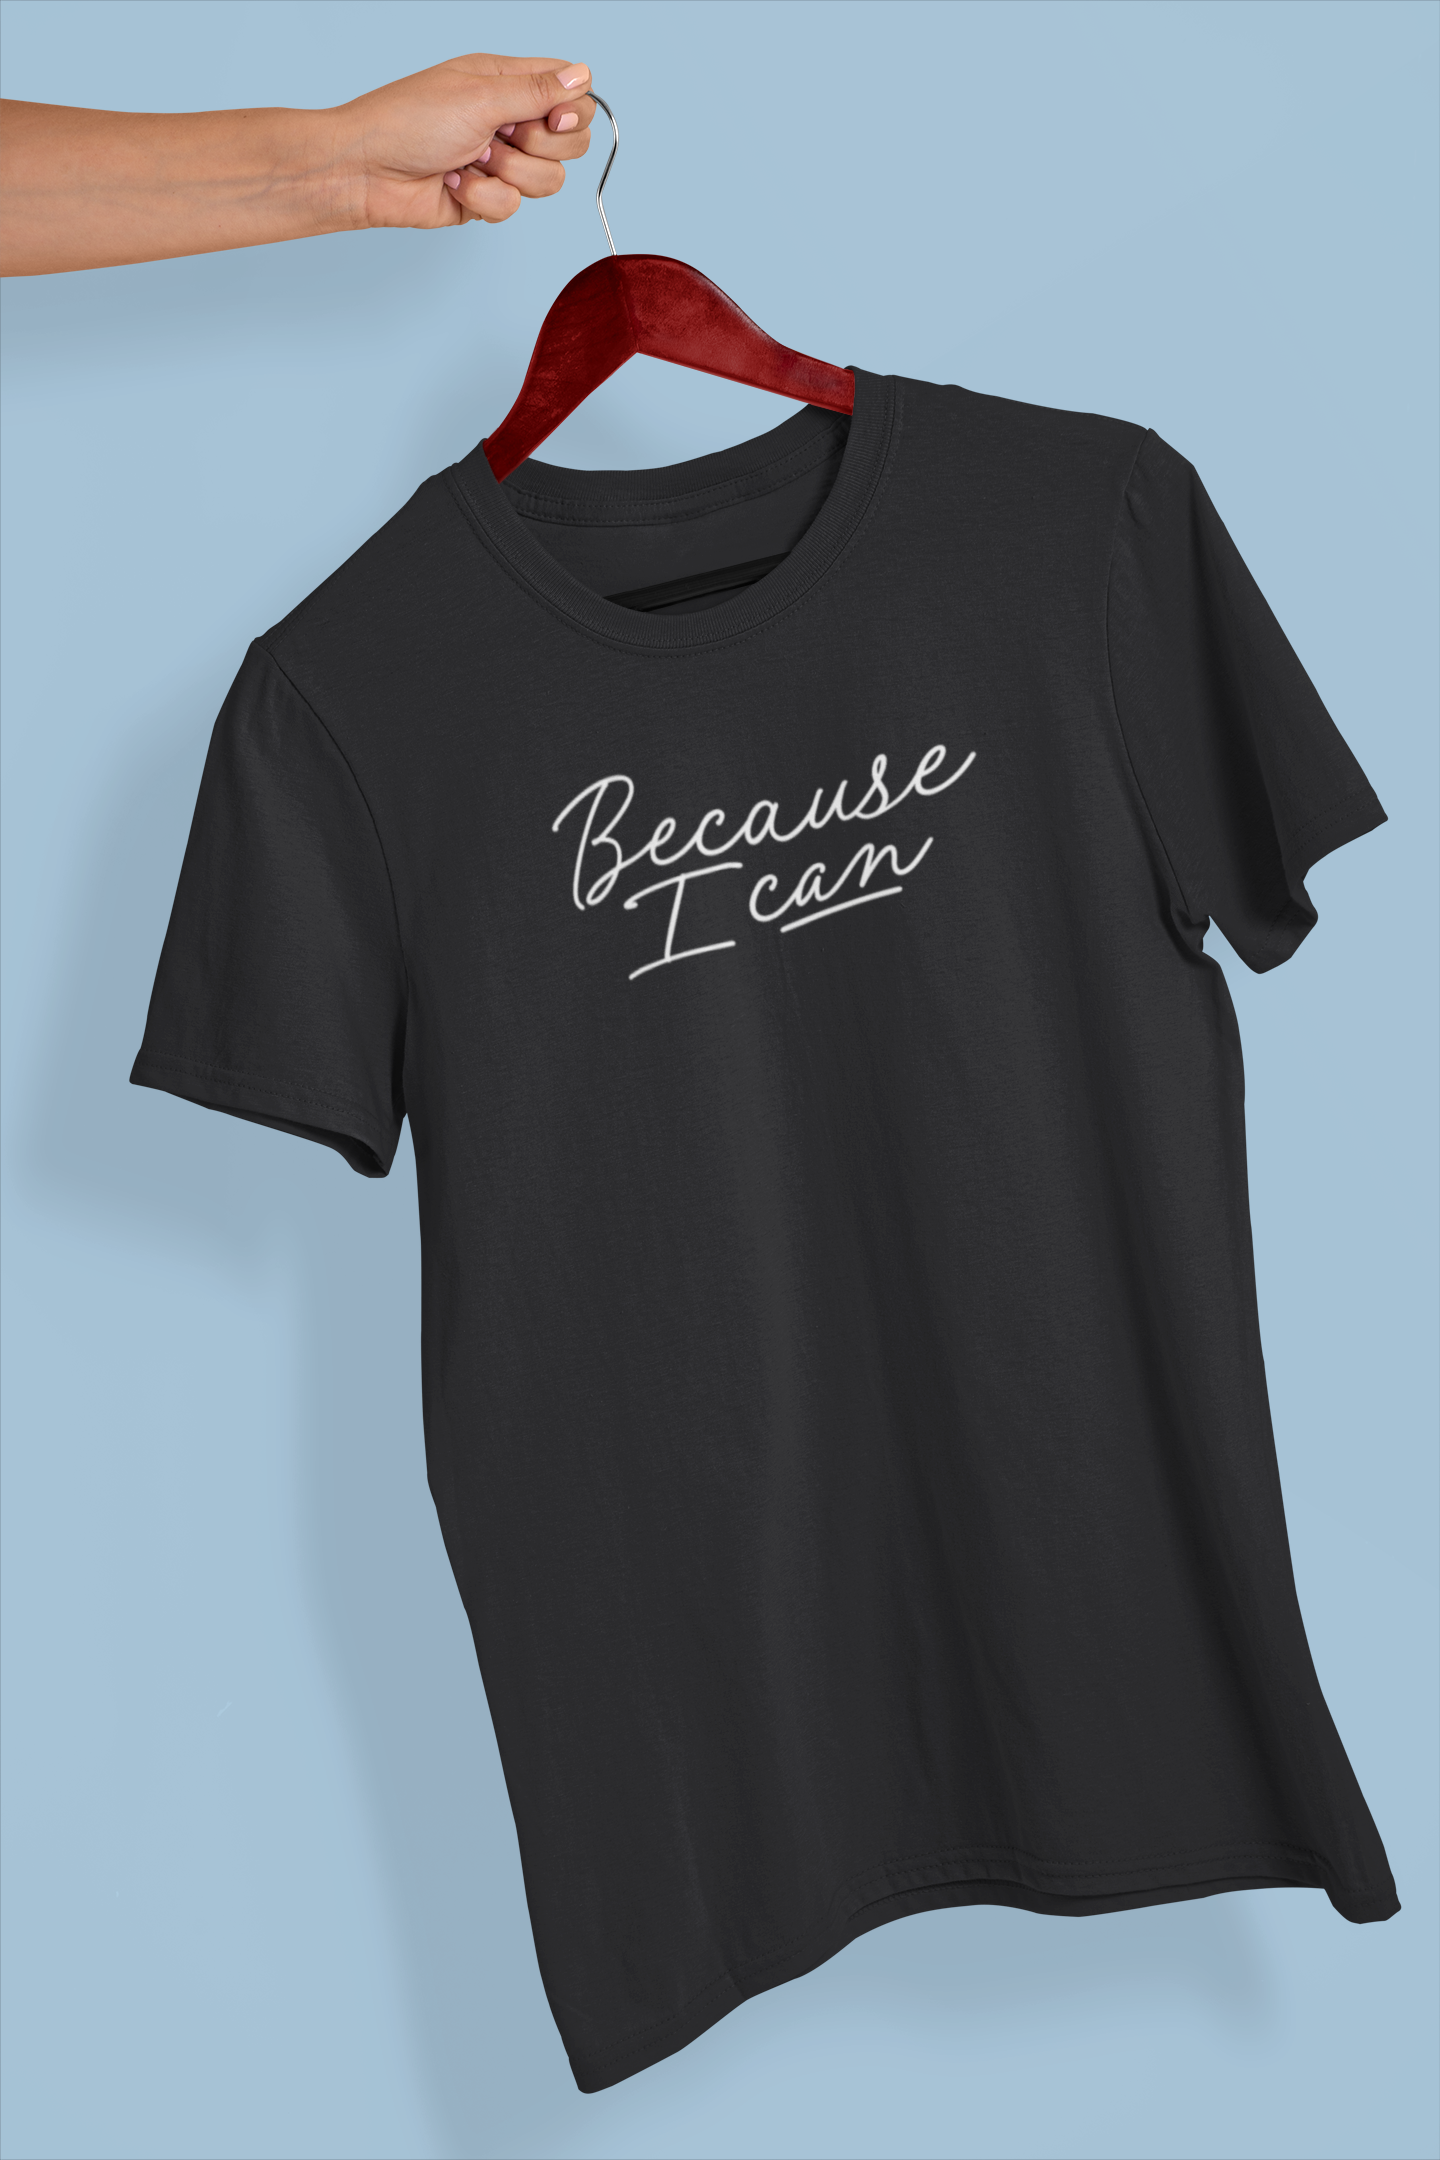 Because I CAN Black T-Shirt